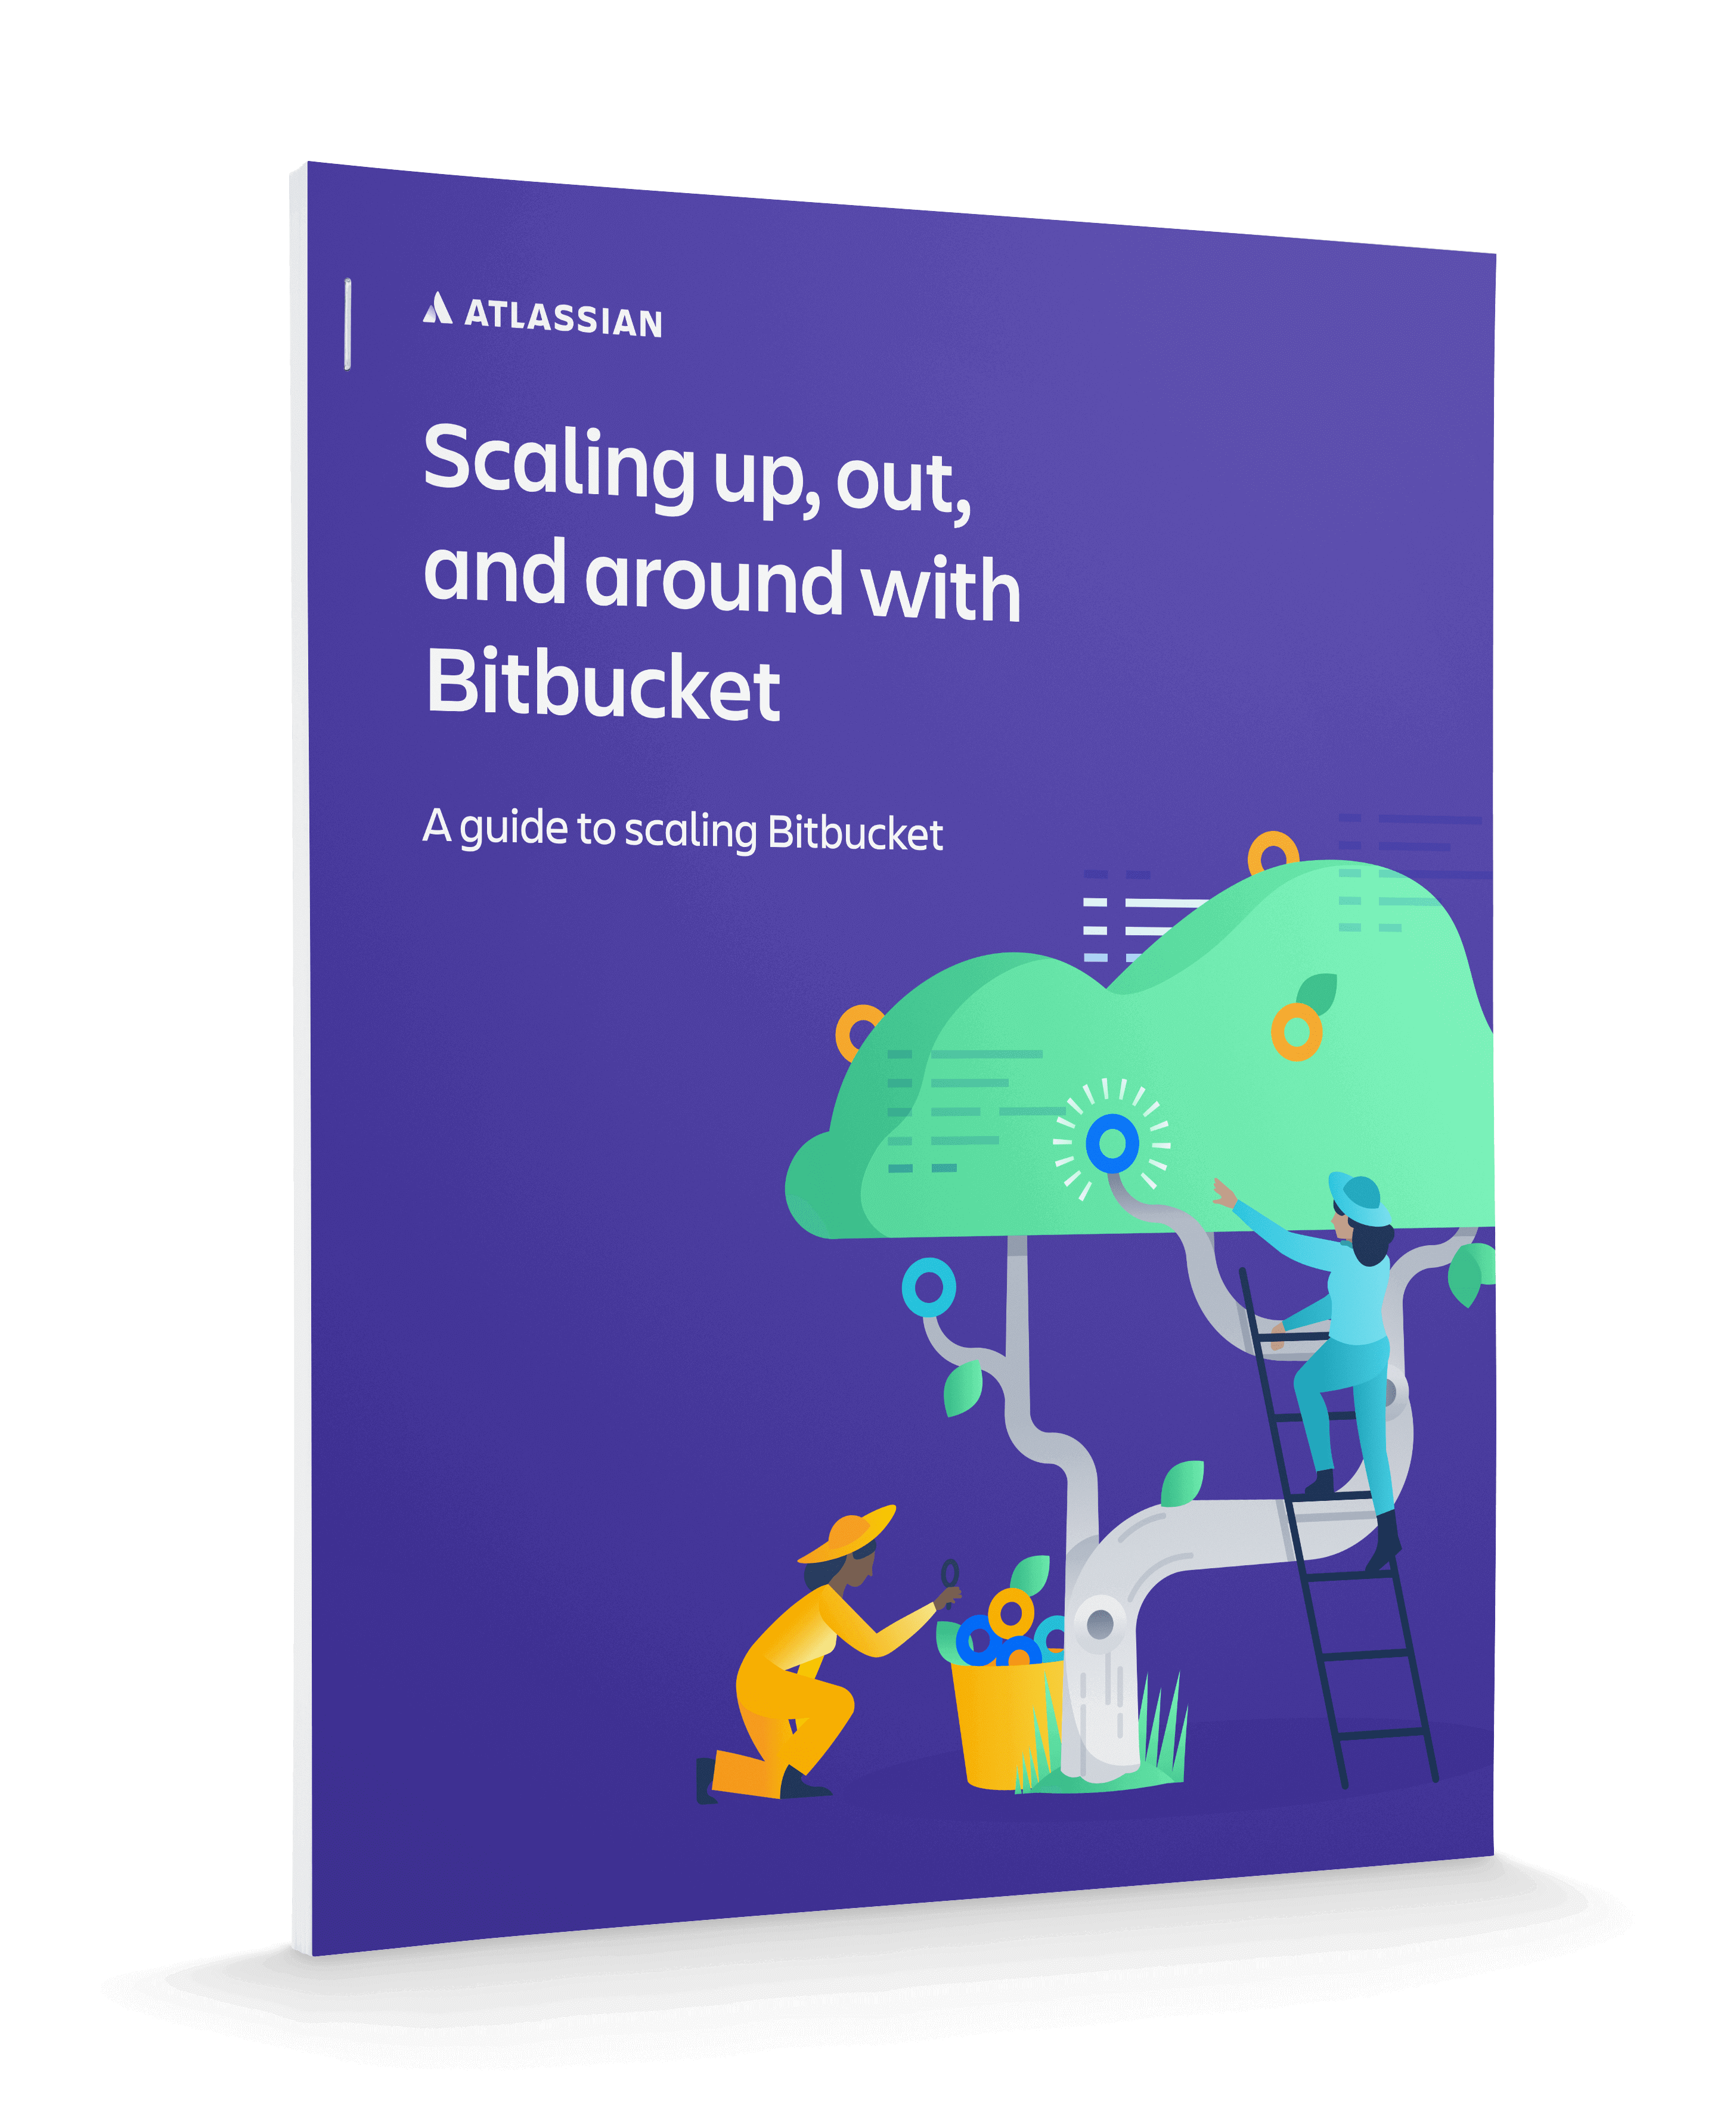 Scaling up, out and around with Bitbucket Data Center cover